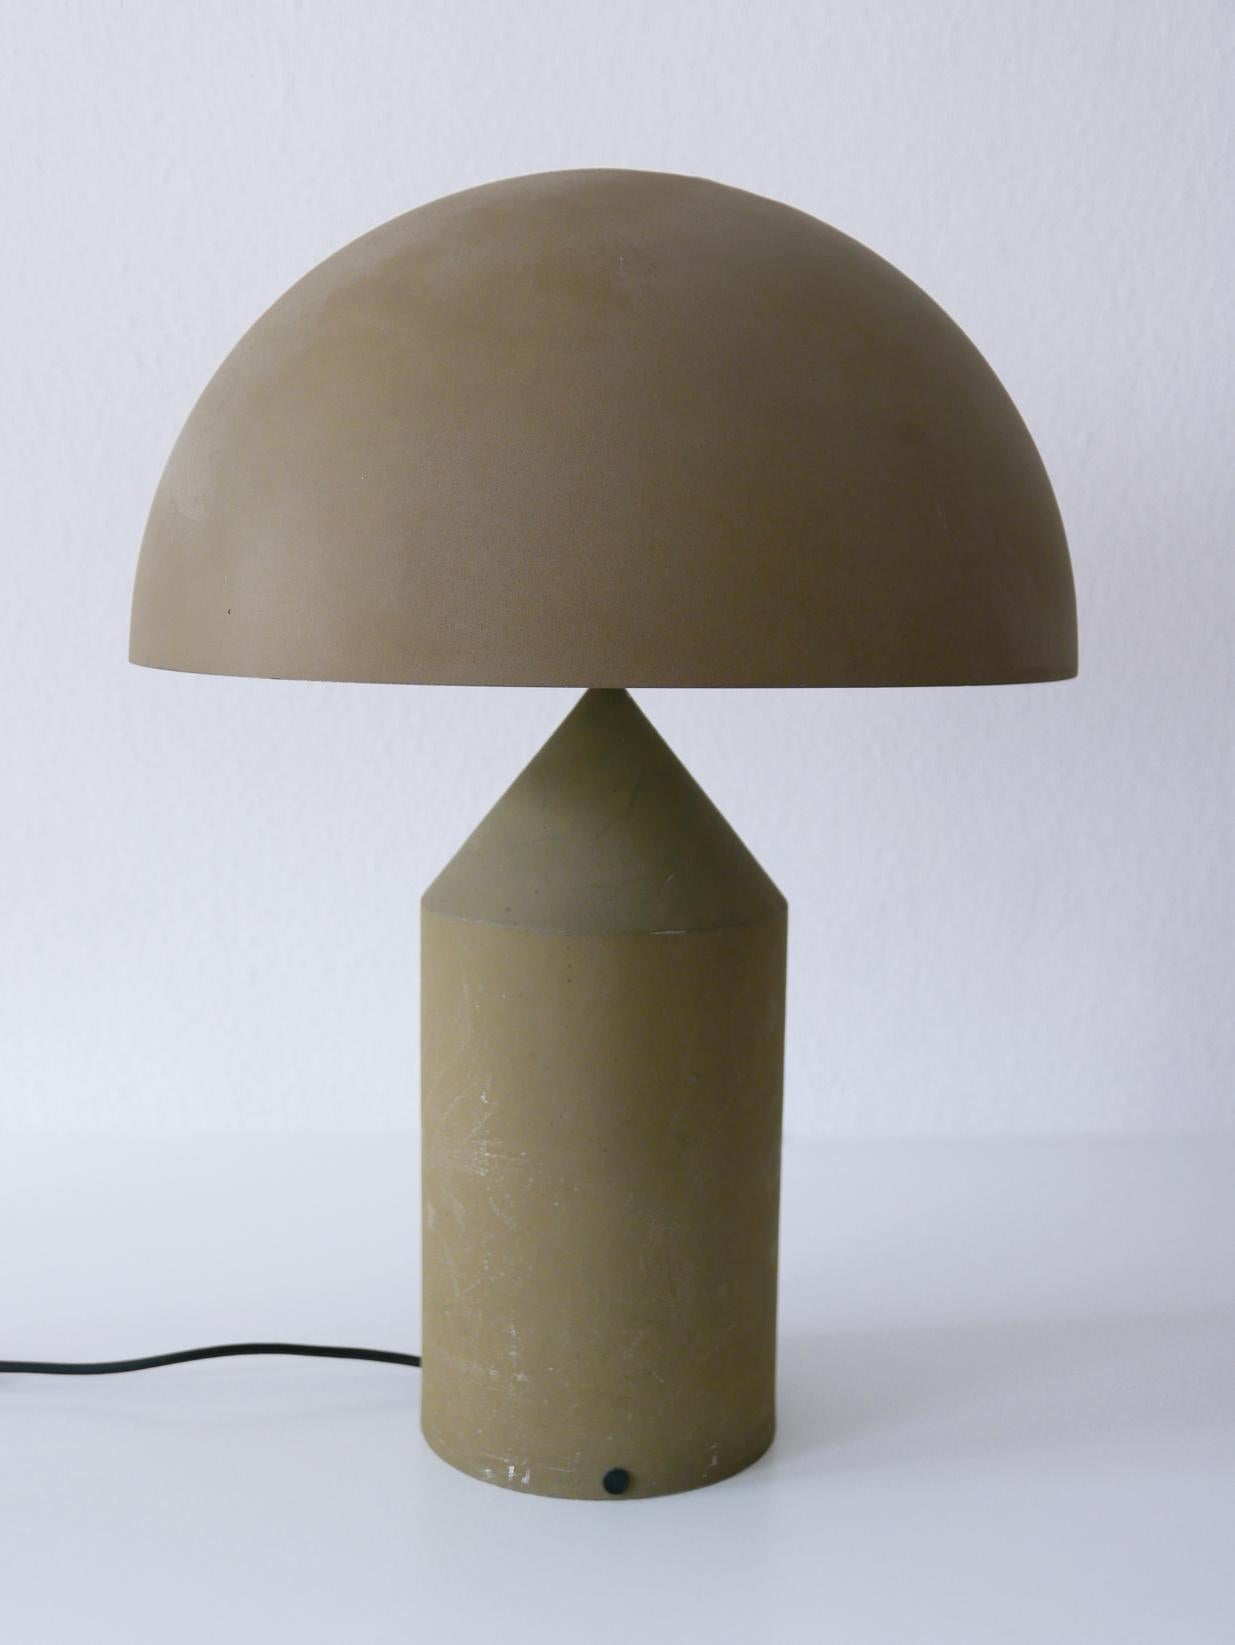 Aluminum Early & Huge Atollo Table Lamp by Vico Magistretti for Oluce, Italy, 1977